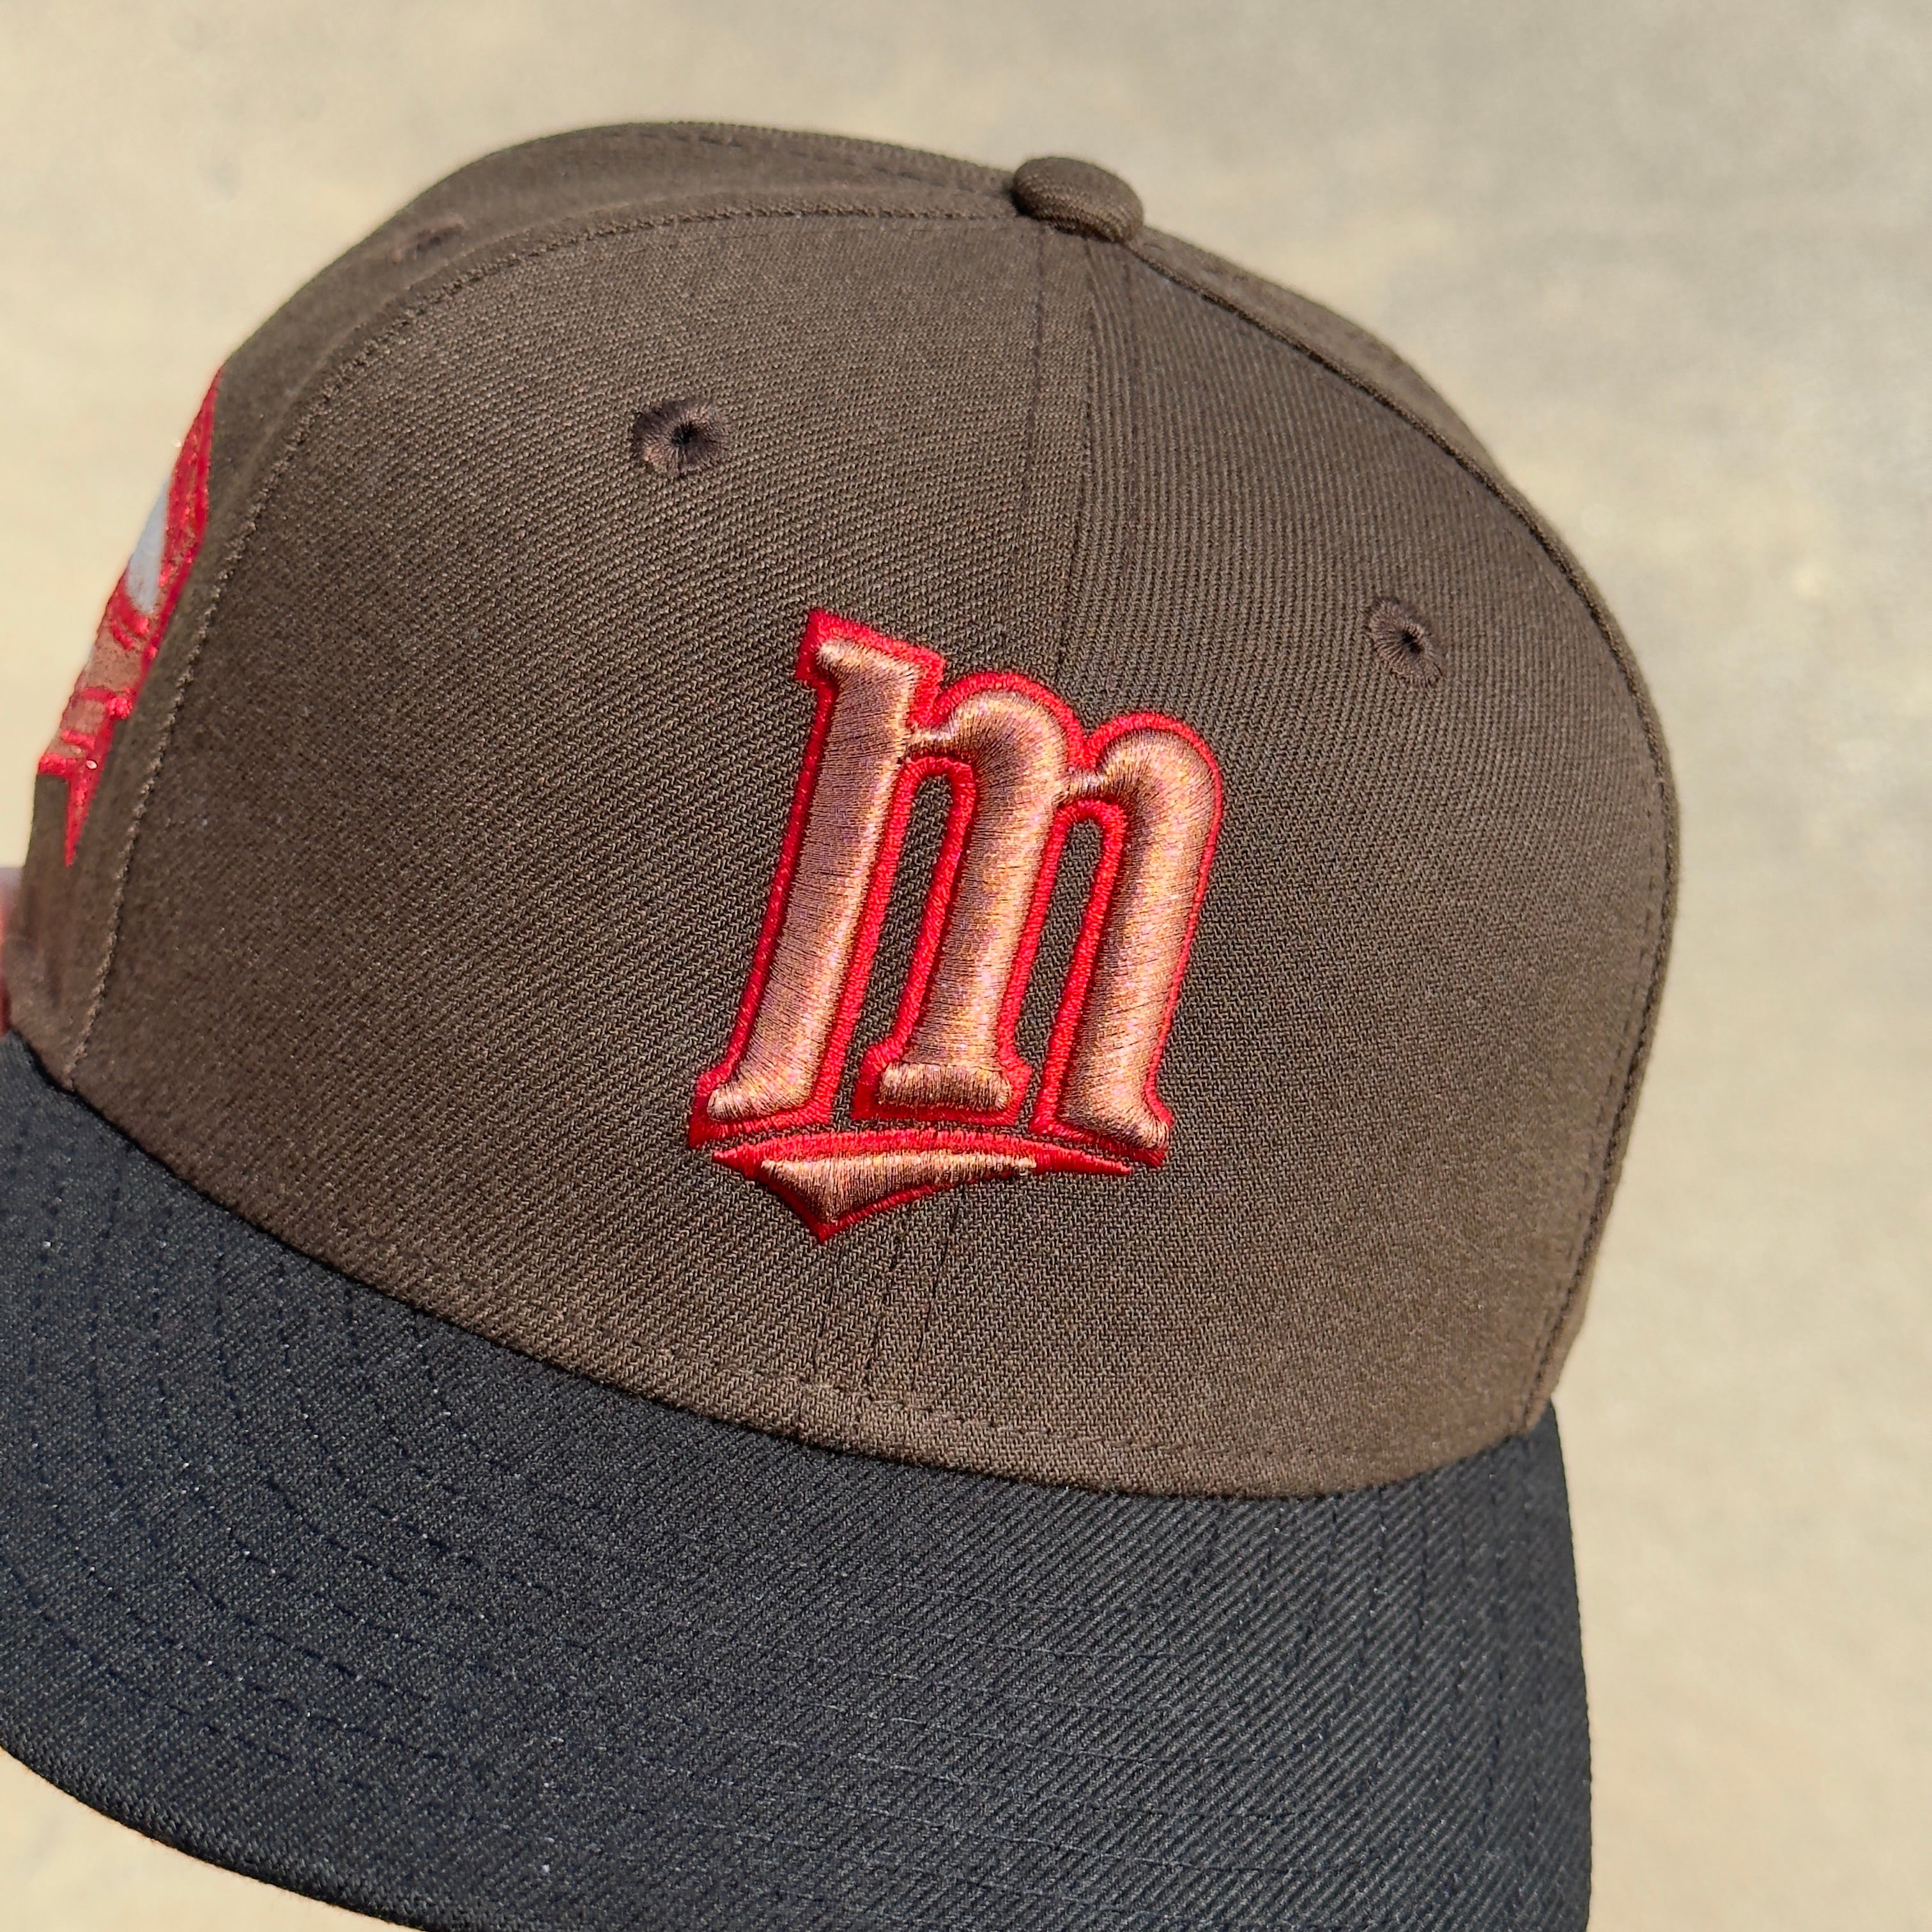 1/8 USED Minnesota Twins MMM Metrodome 1992 59fifty New Era Fitted Hat Cap